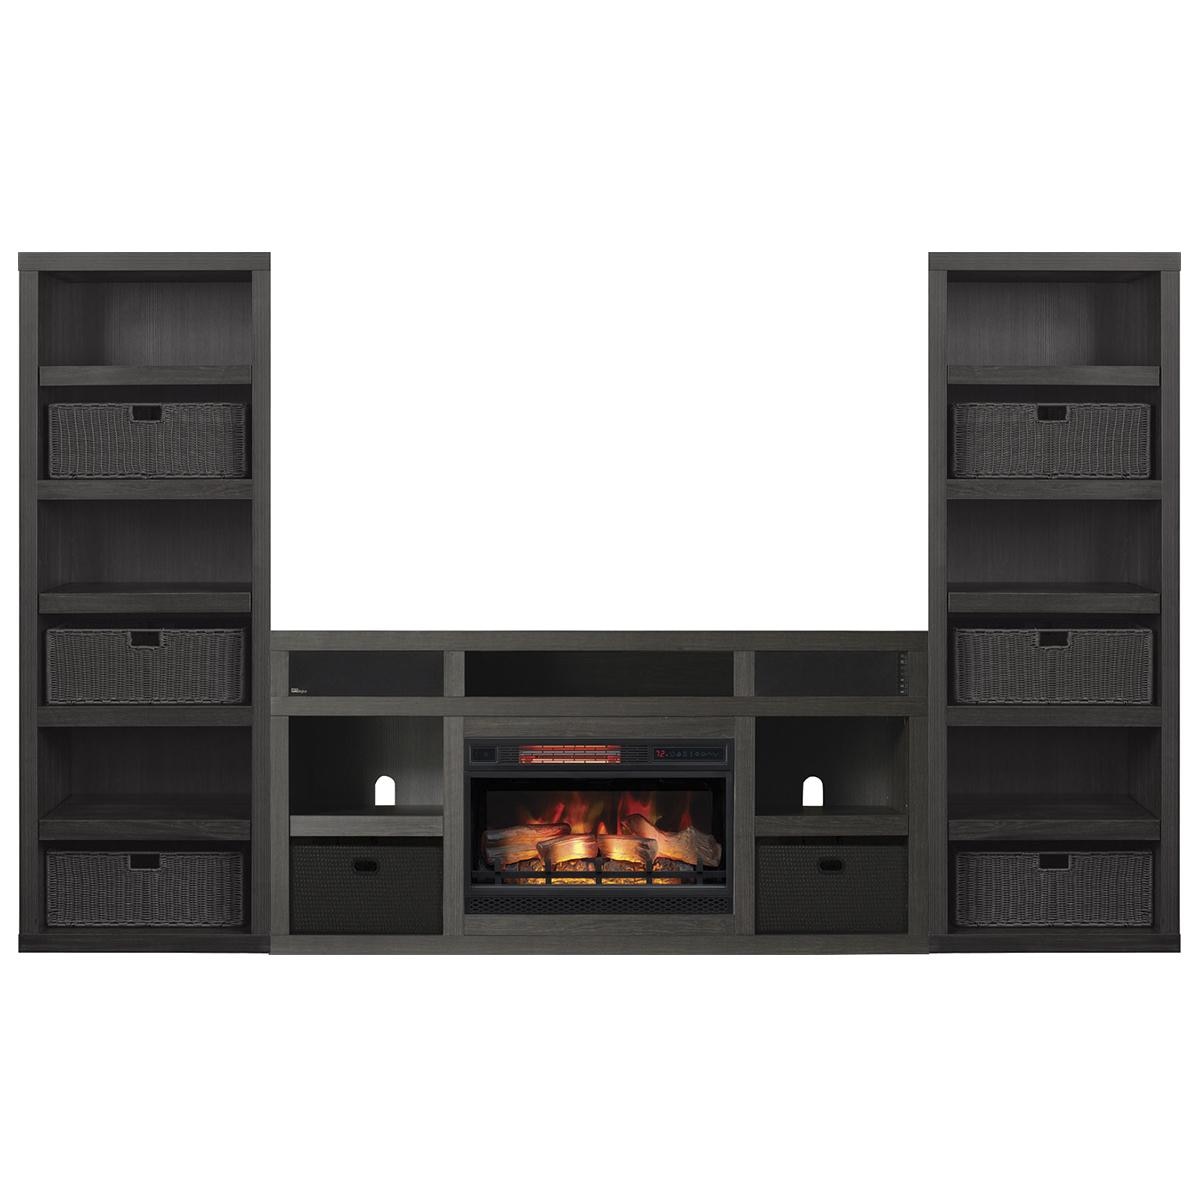 65 Inch Tv Stand with Fireplace Luxury Fabio Flames Greatlin 3 Piece Fireplace Entertainment Wall